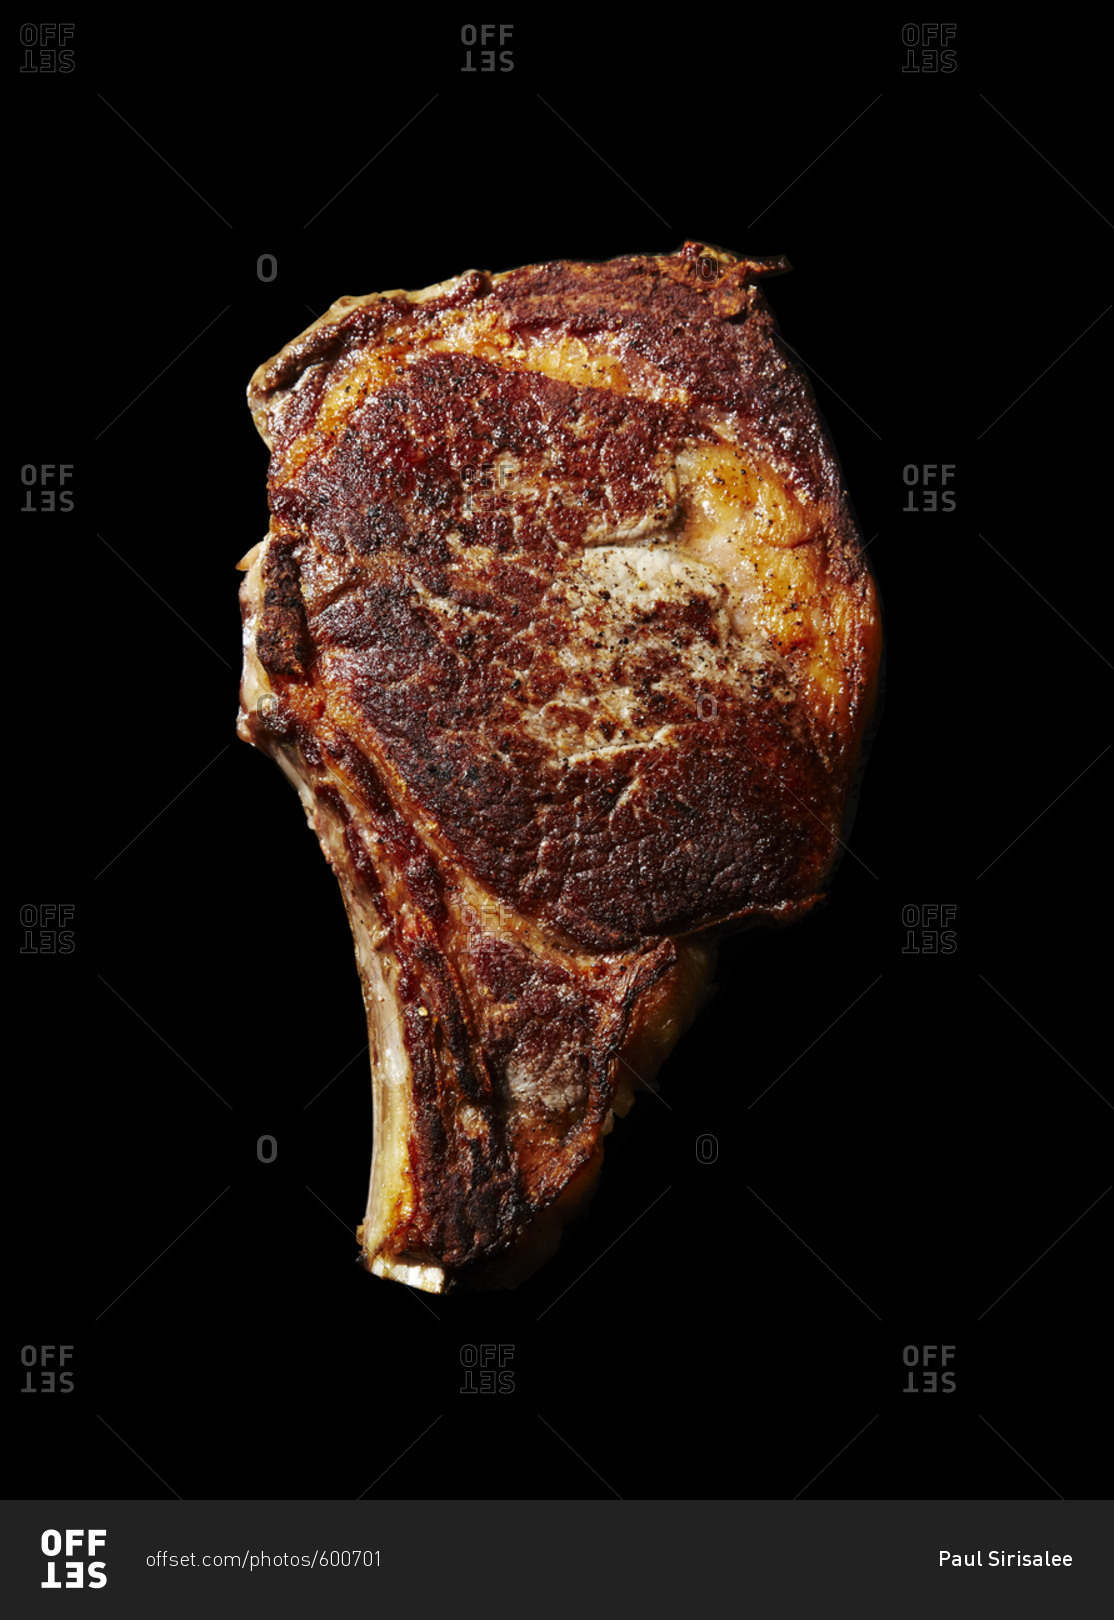 A cooked rib eyed steak